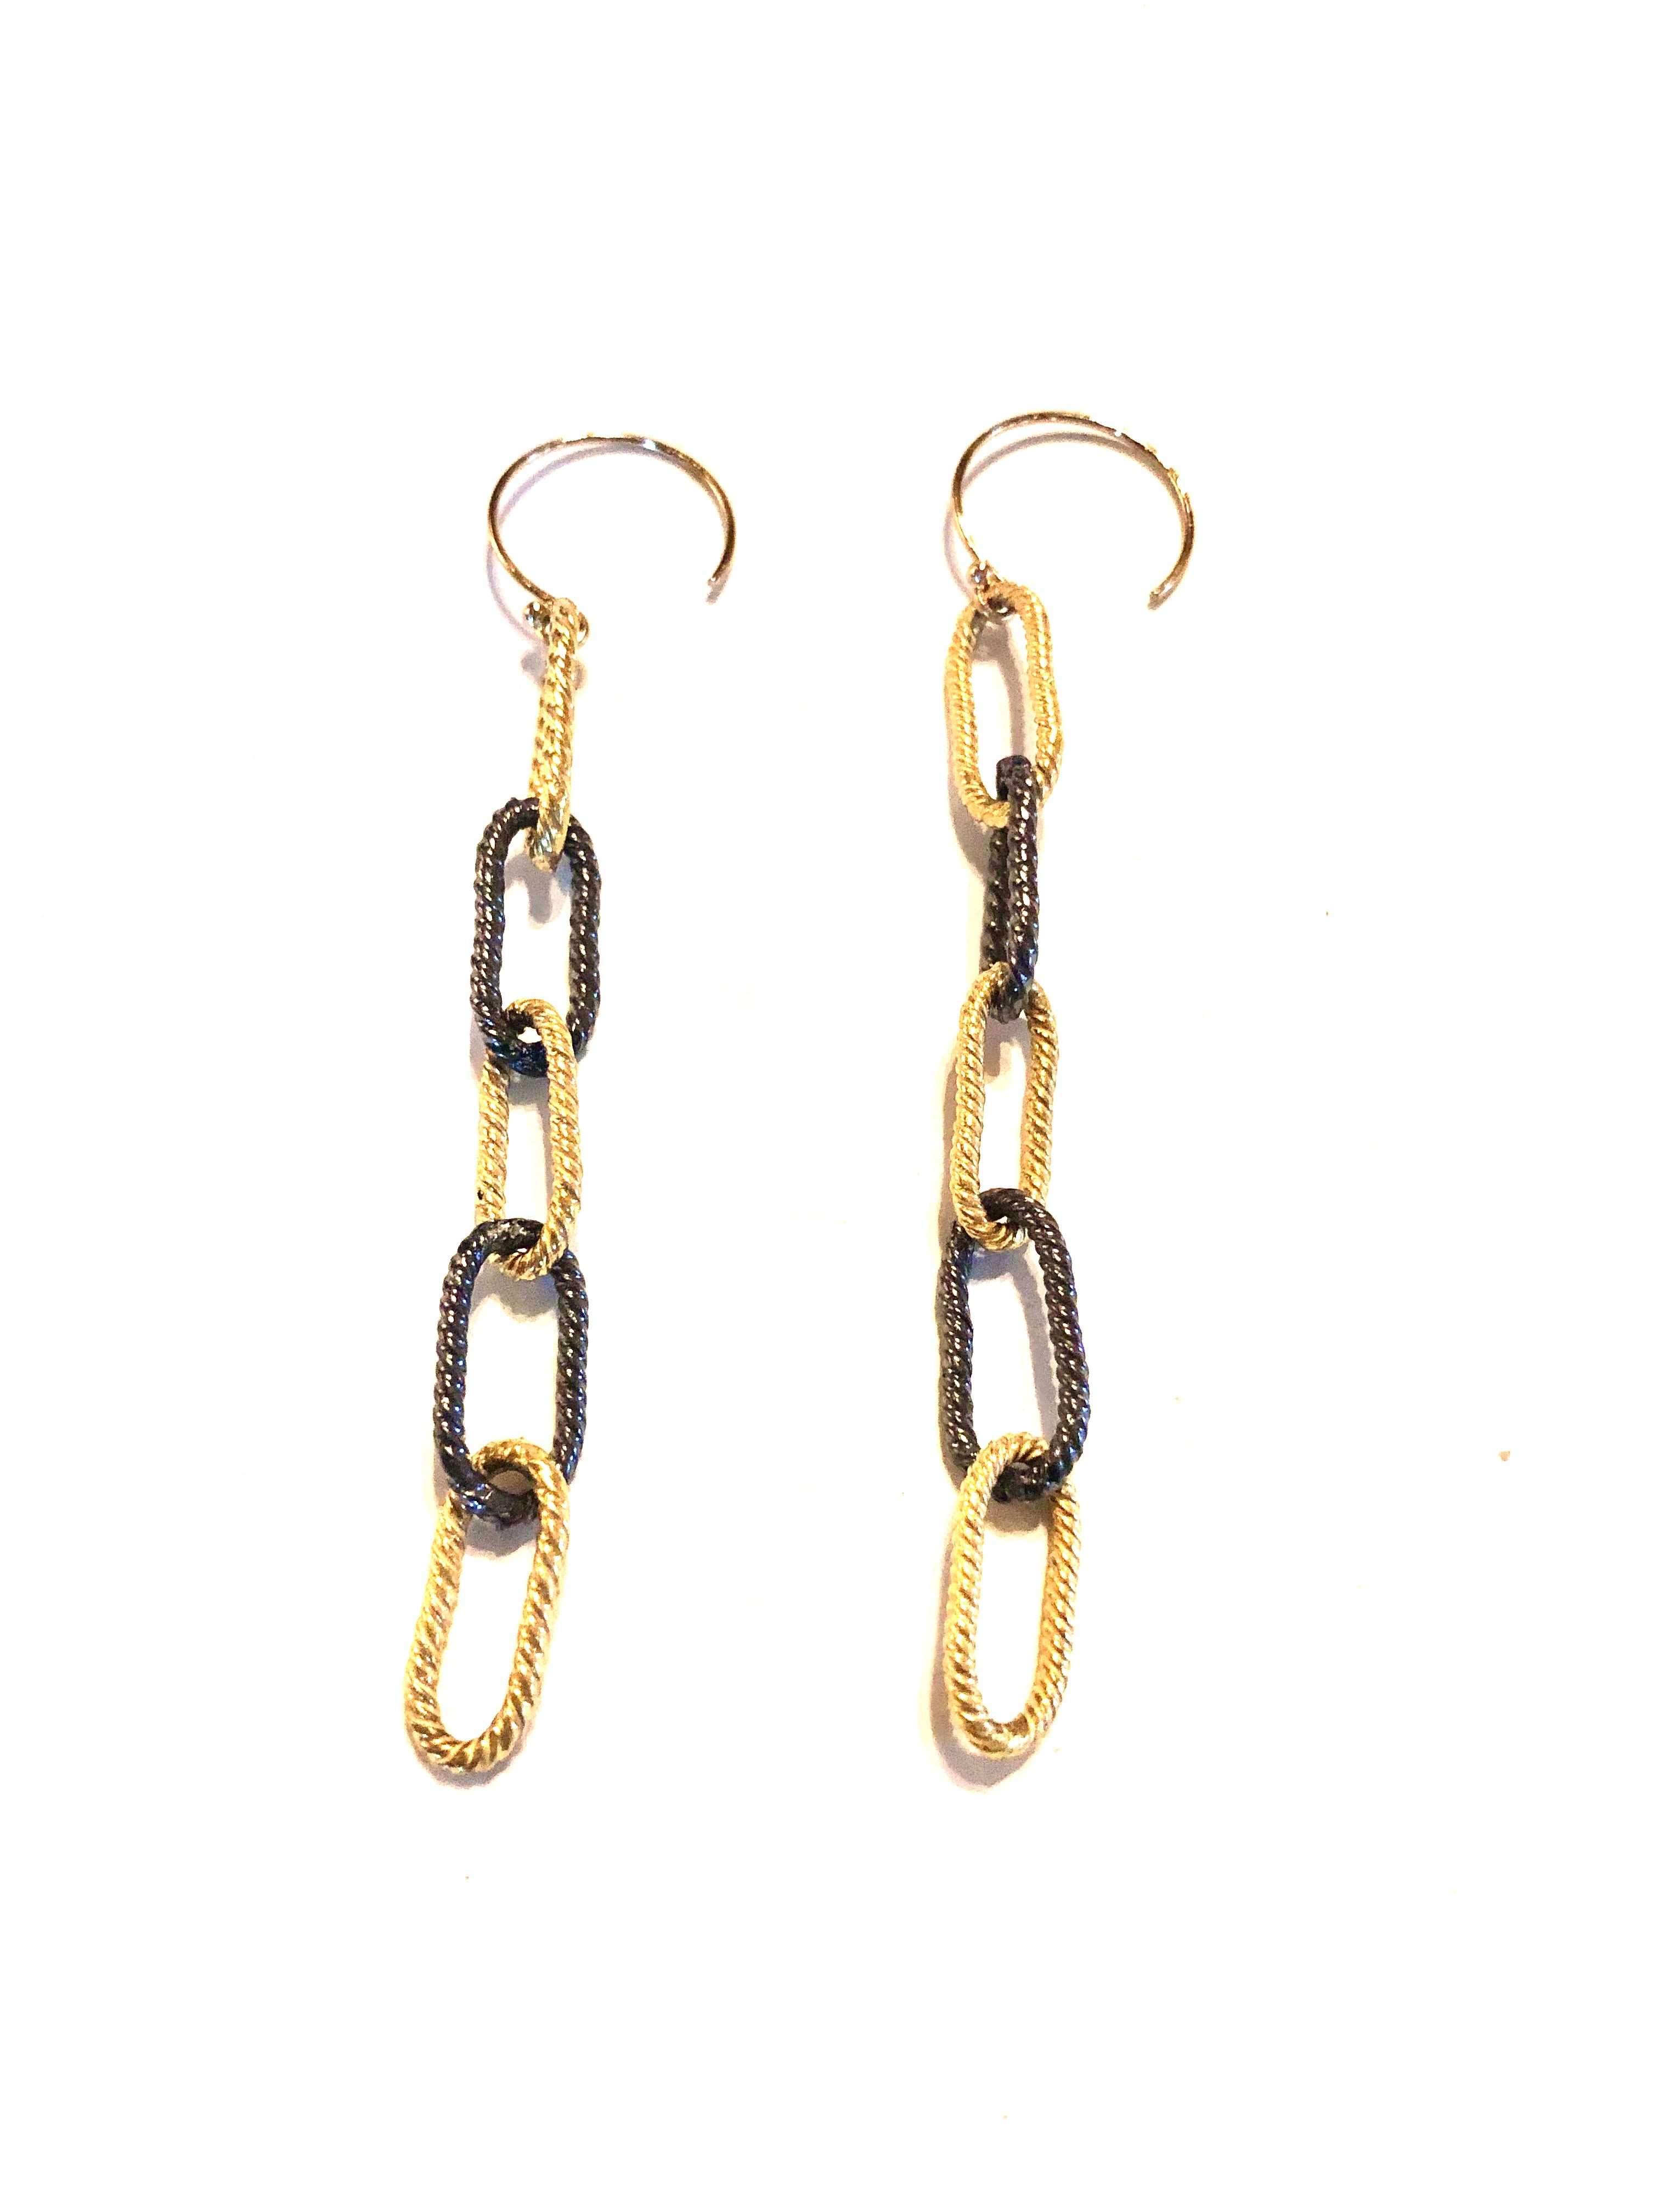 Paperclip-E - earrings with handmade sterling silver and vermeil chain